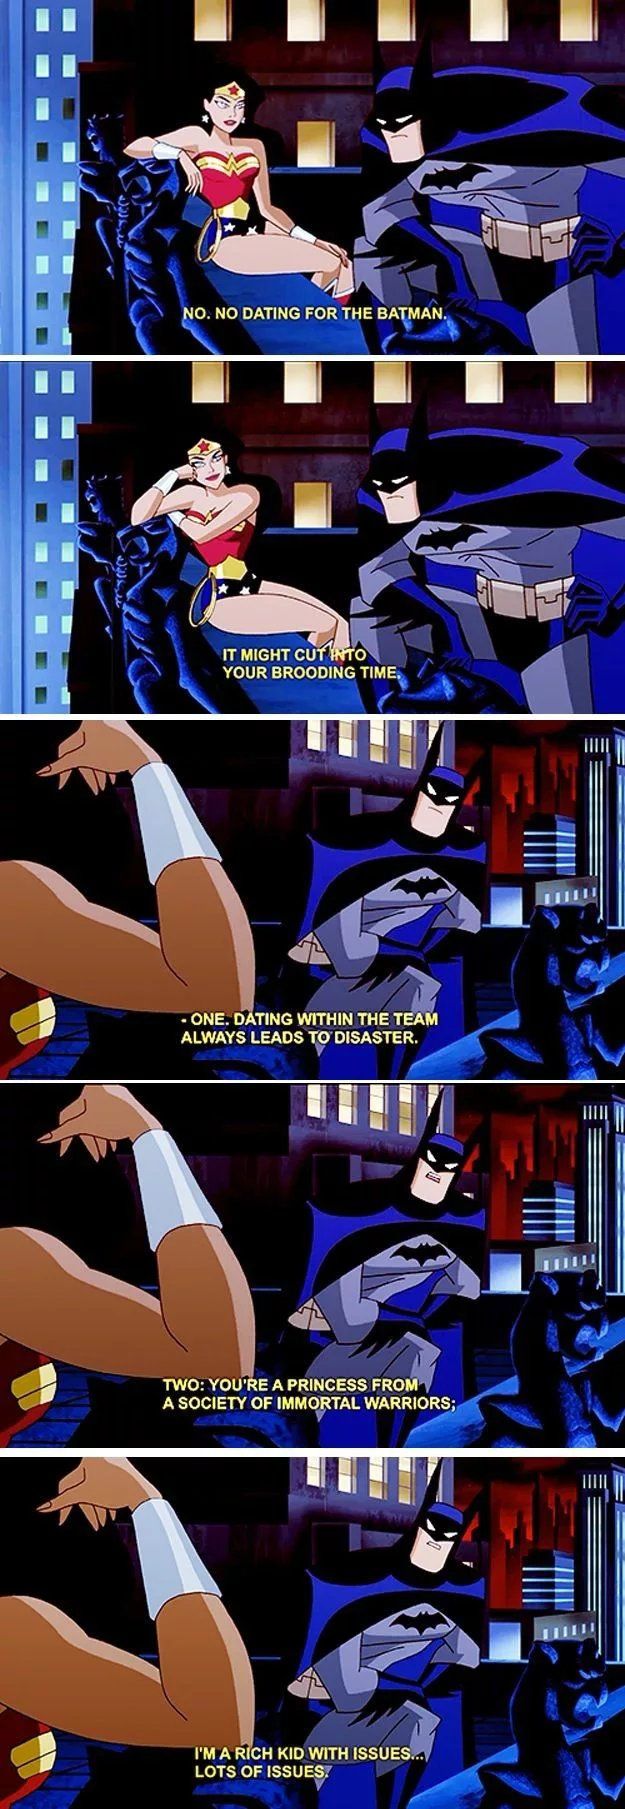 No dating for the batman